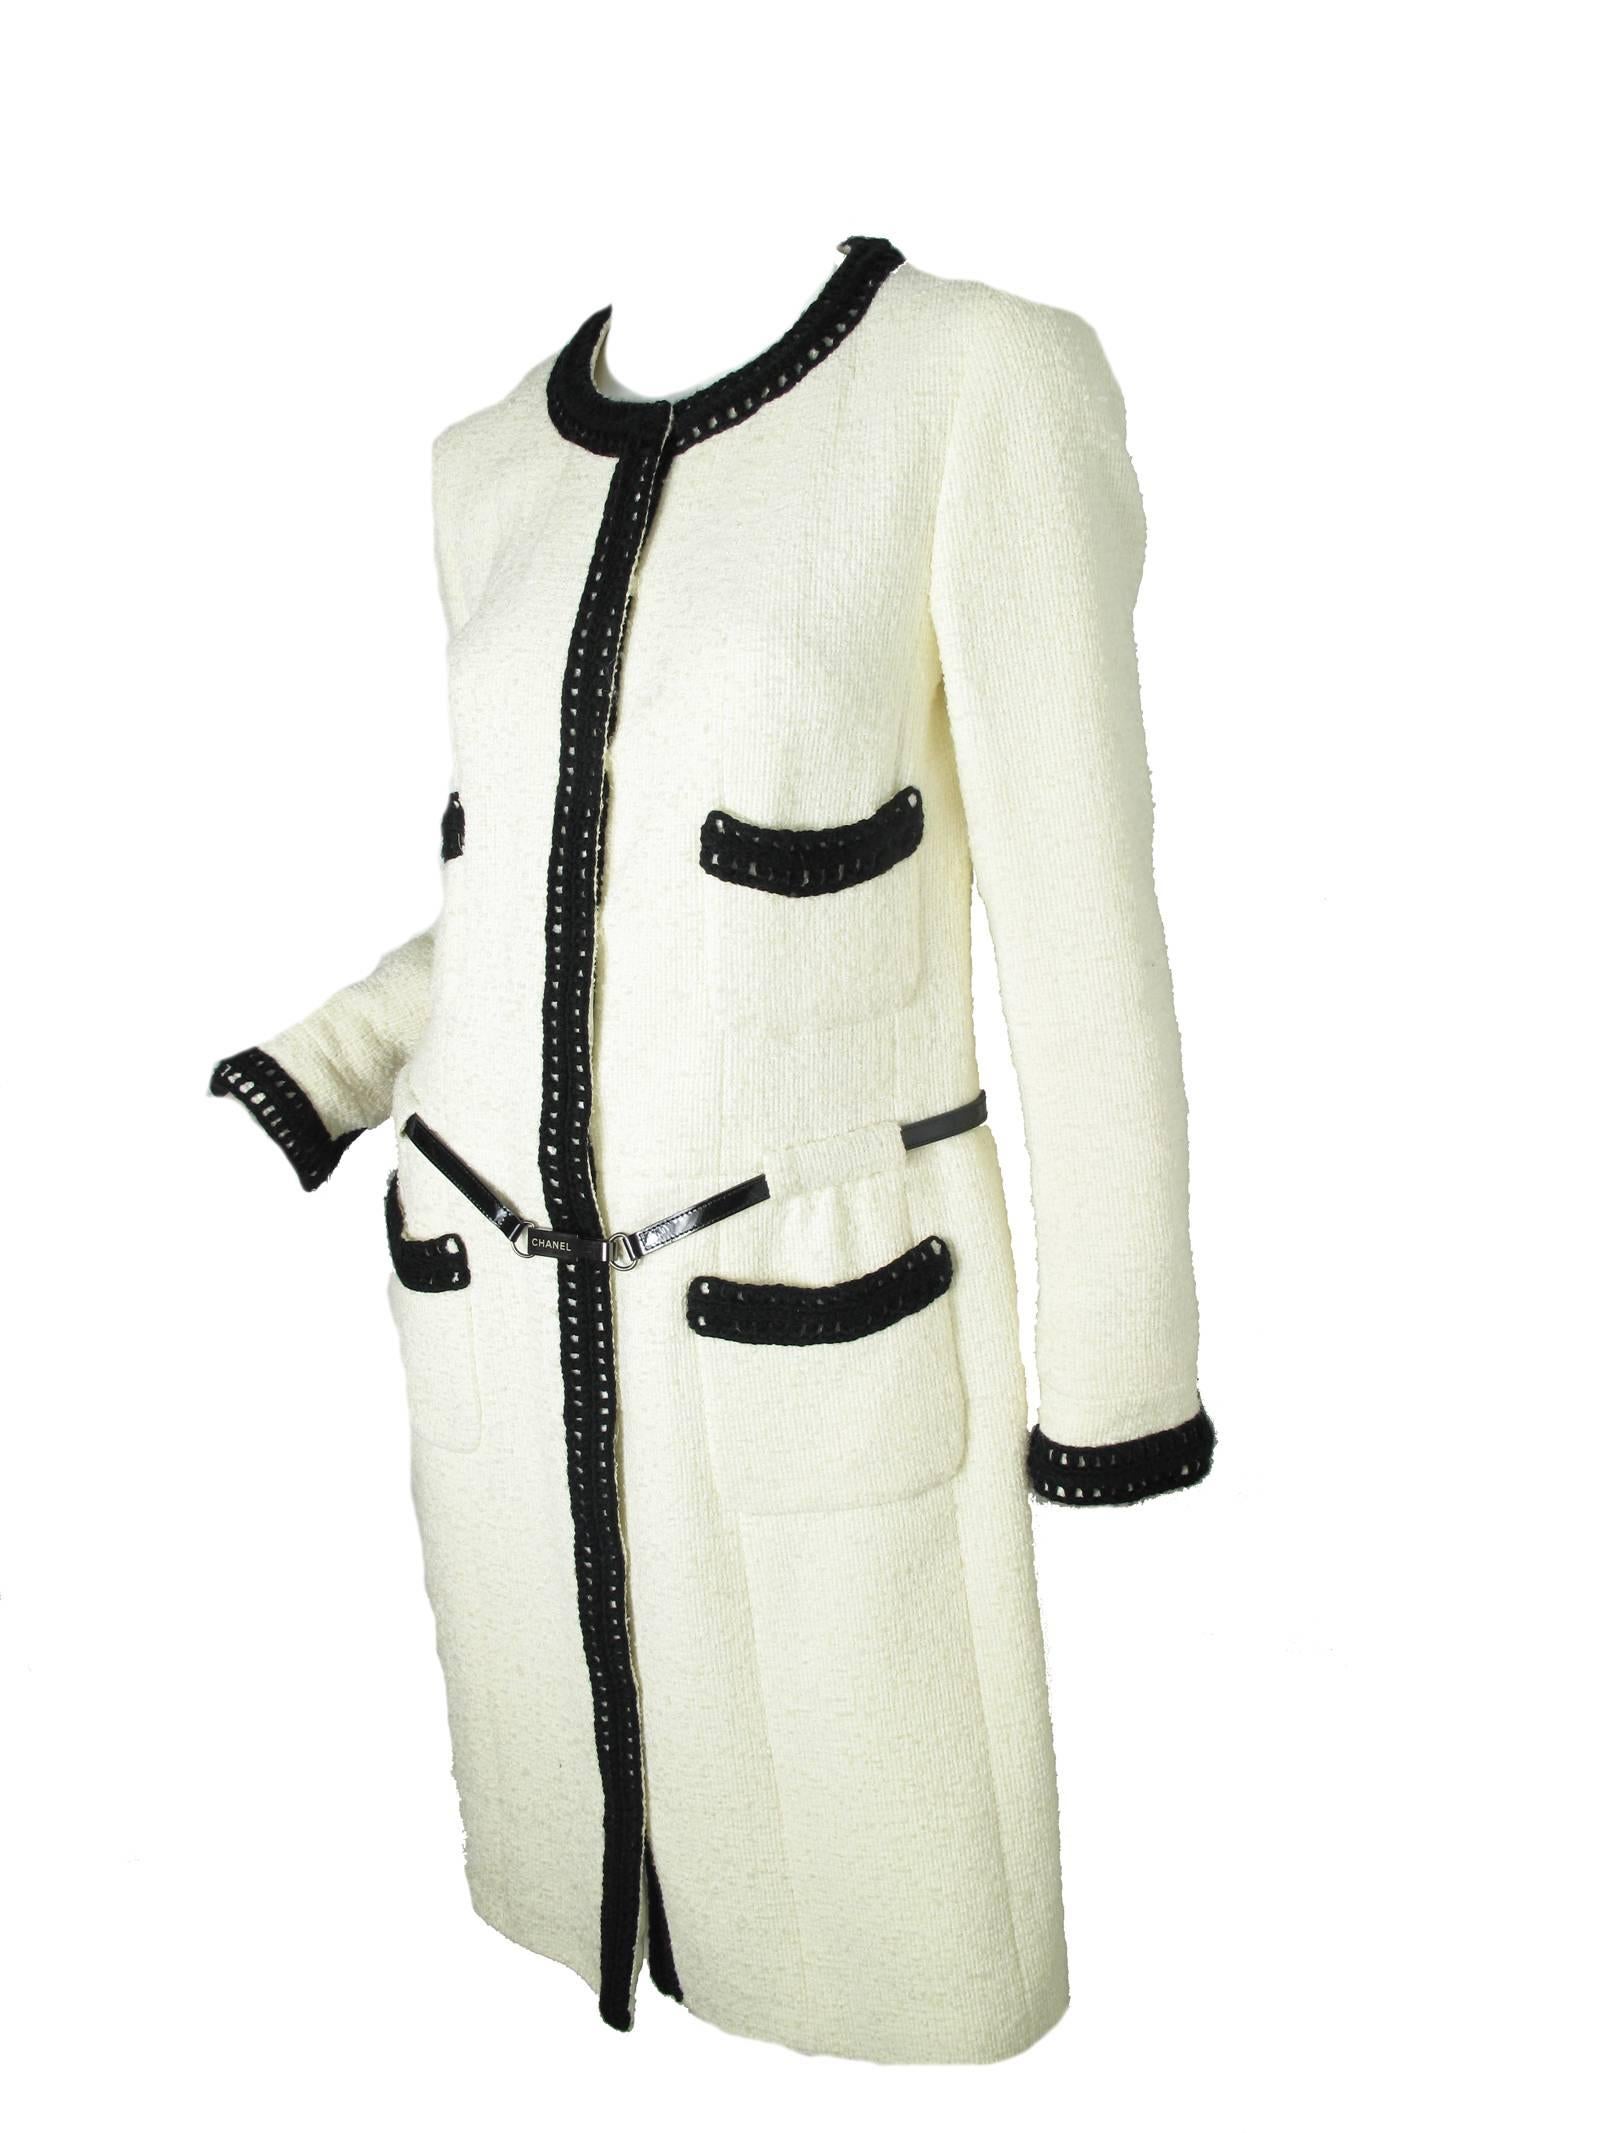 2000 Chanel boucle off white dress, black crochet trim, black patent belt. Snaps to close. Nylon, wool, mohair, rayon. Four front pockets. Size 40 / US 8 - 10 
Condition: good, all over wear and discoloration under arms and collar. 
*only the dress